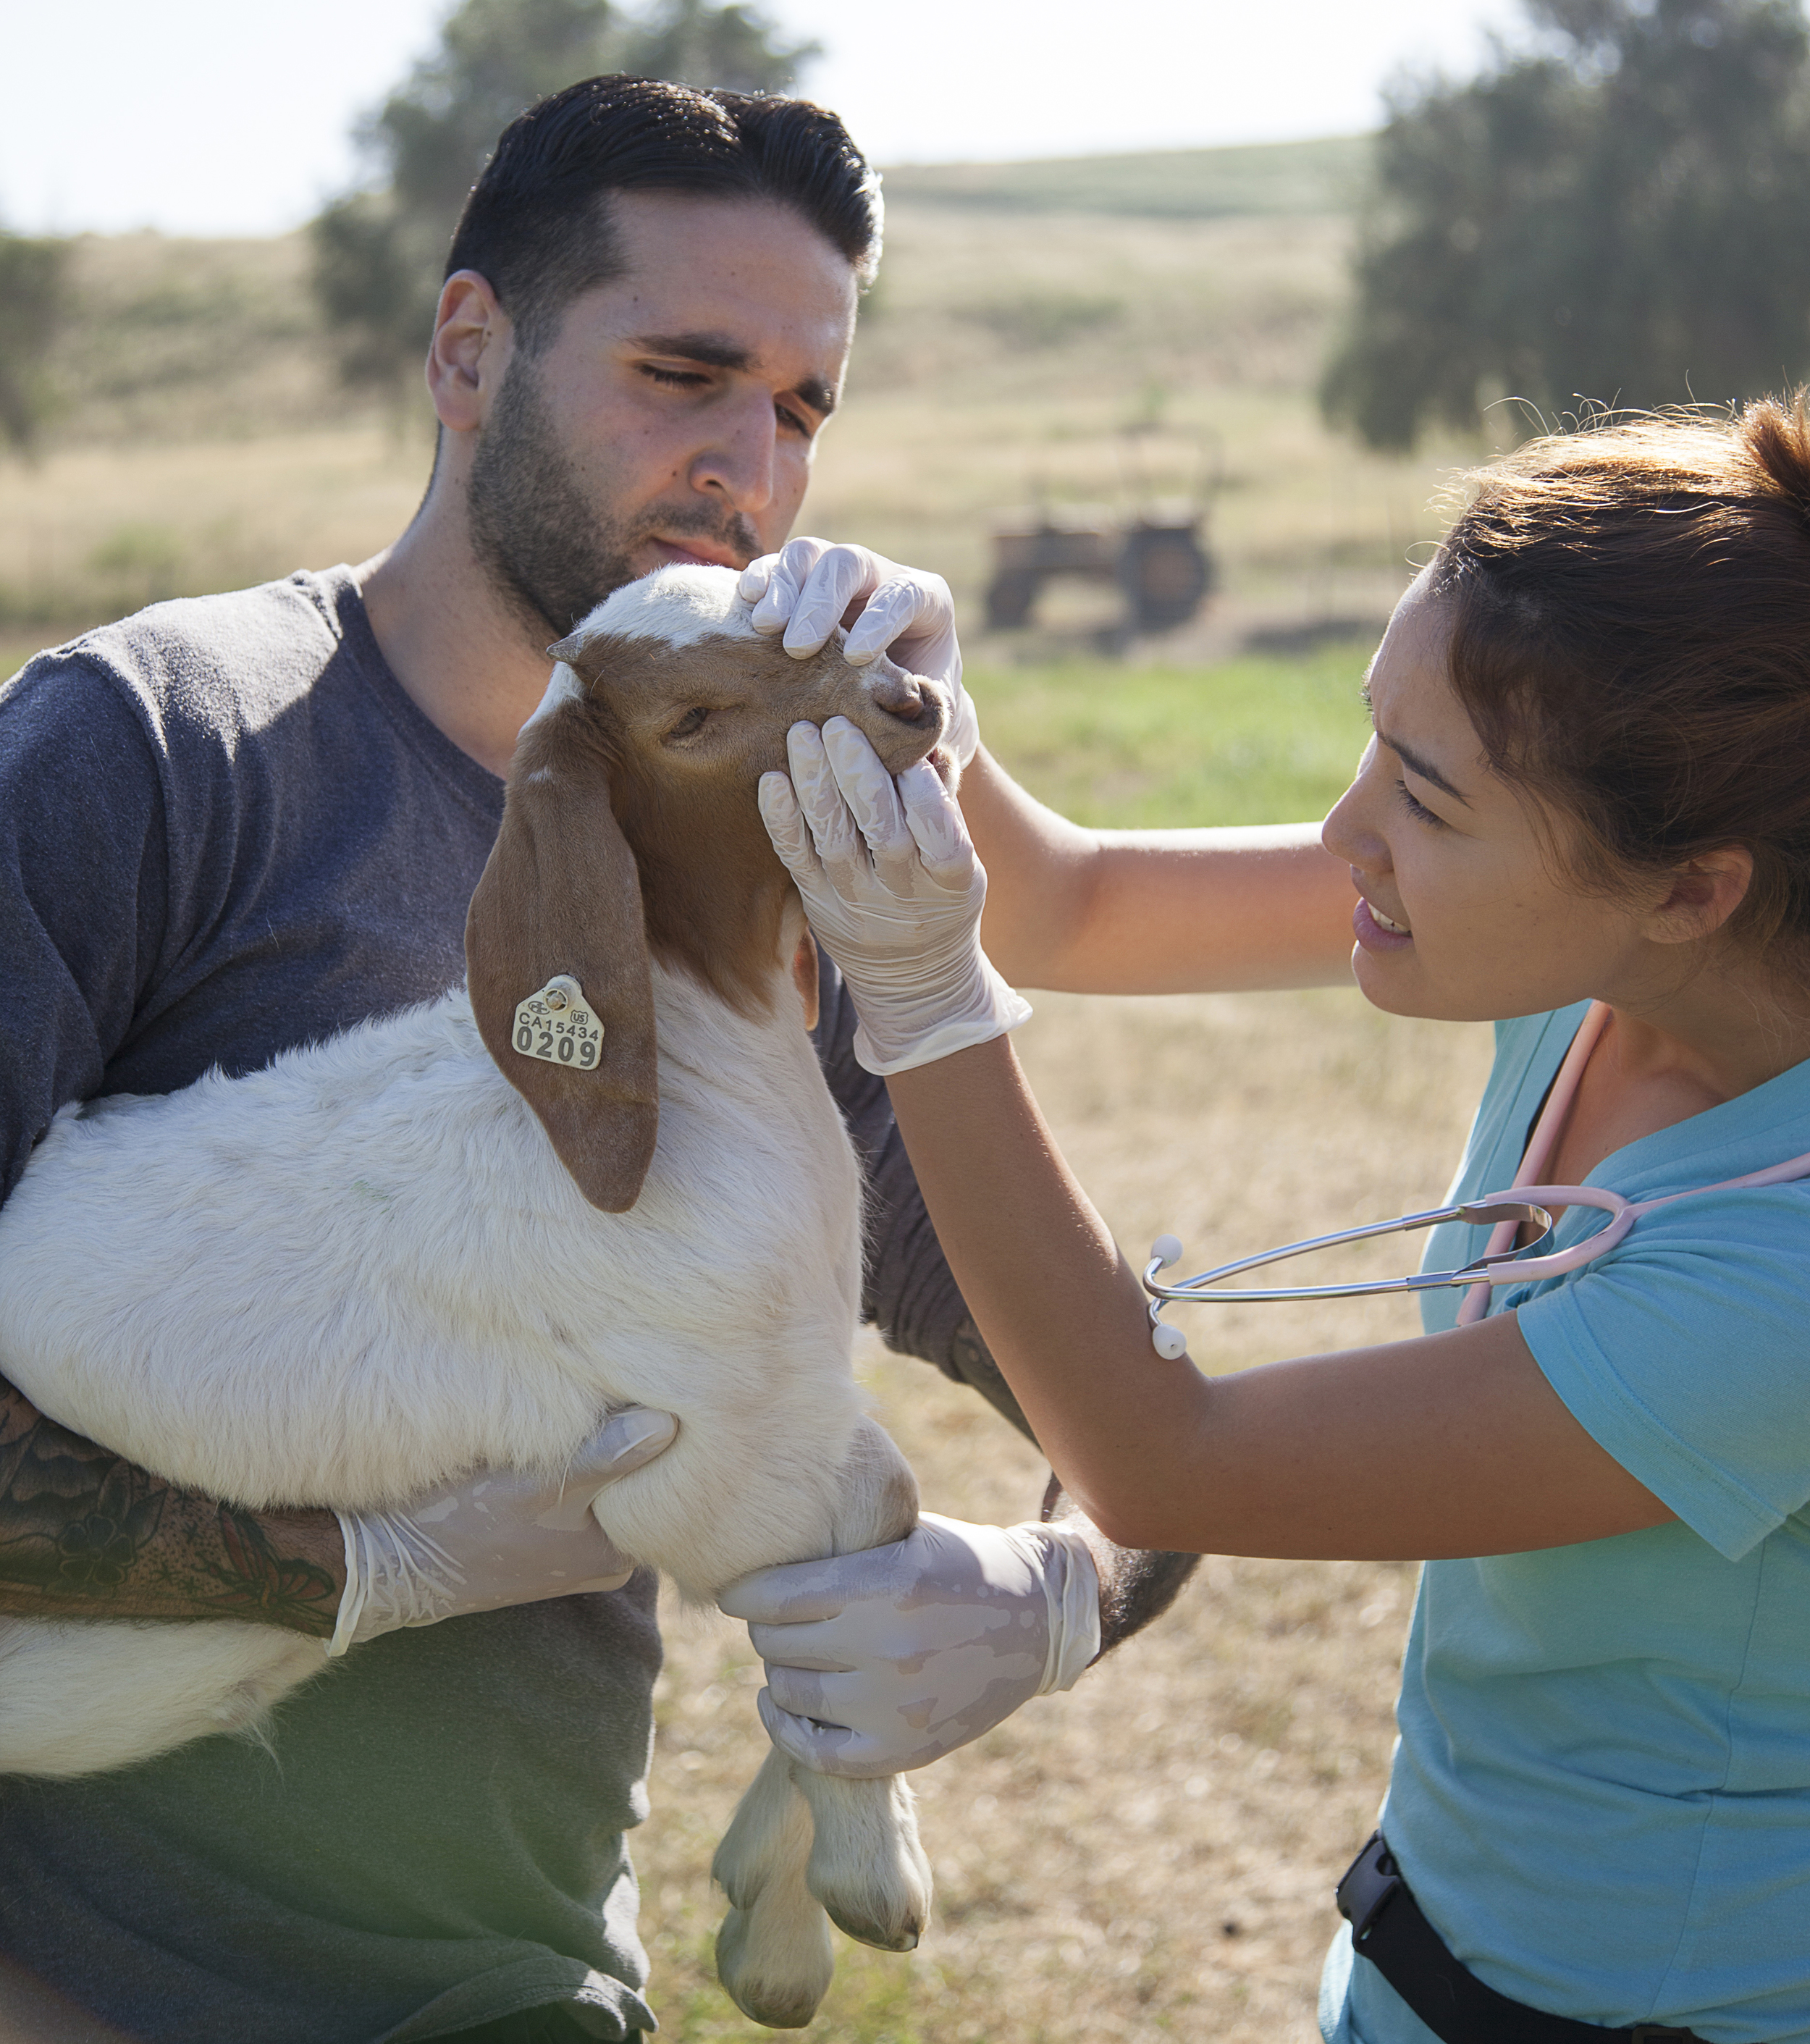  Ben Singh carries a baby goat while Yuri Foreman checks its teeth and gums during a physical exam at the Pierce farm on Friday, March 20, 2015. Woodland Hills, Calif.  Read the full story&nbsp; here  